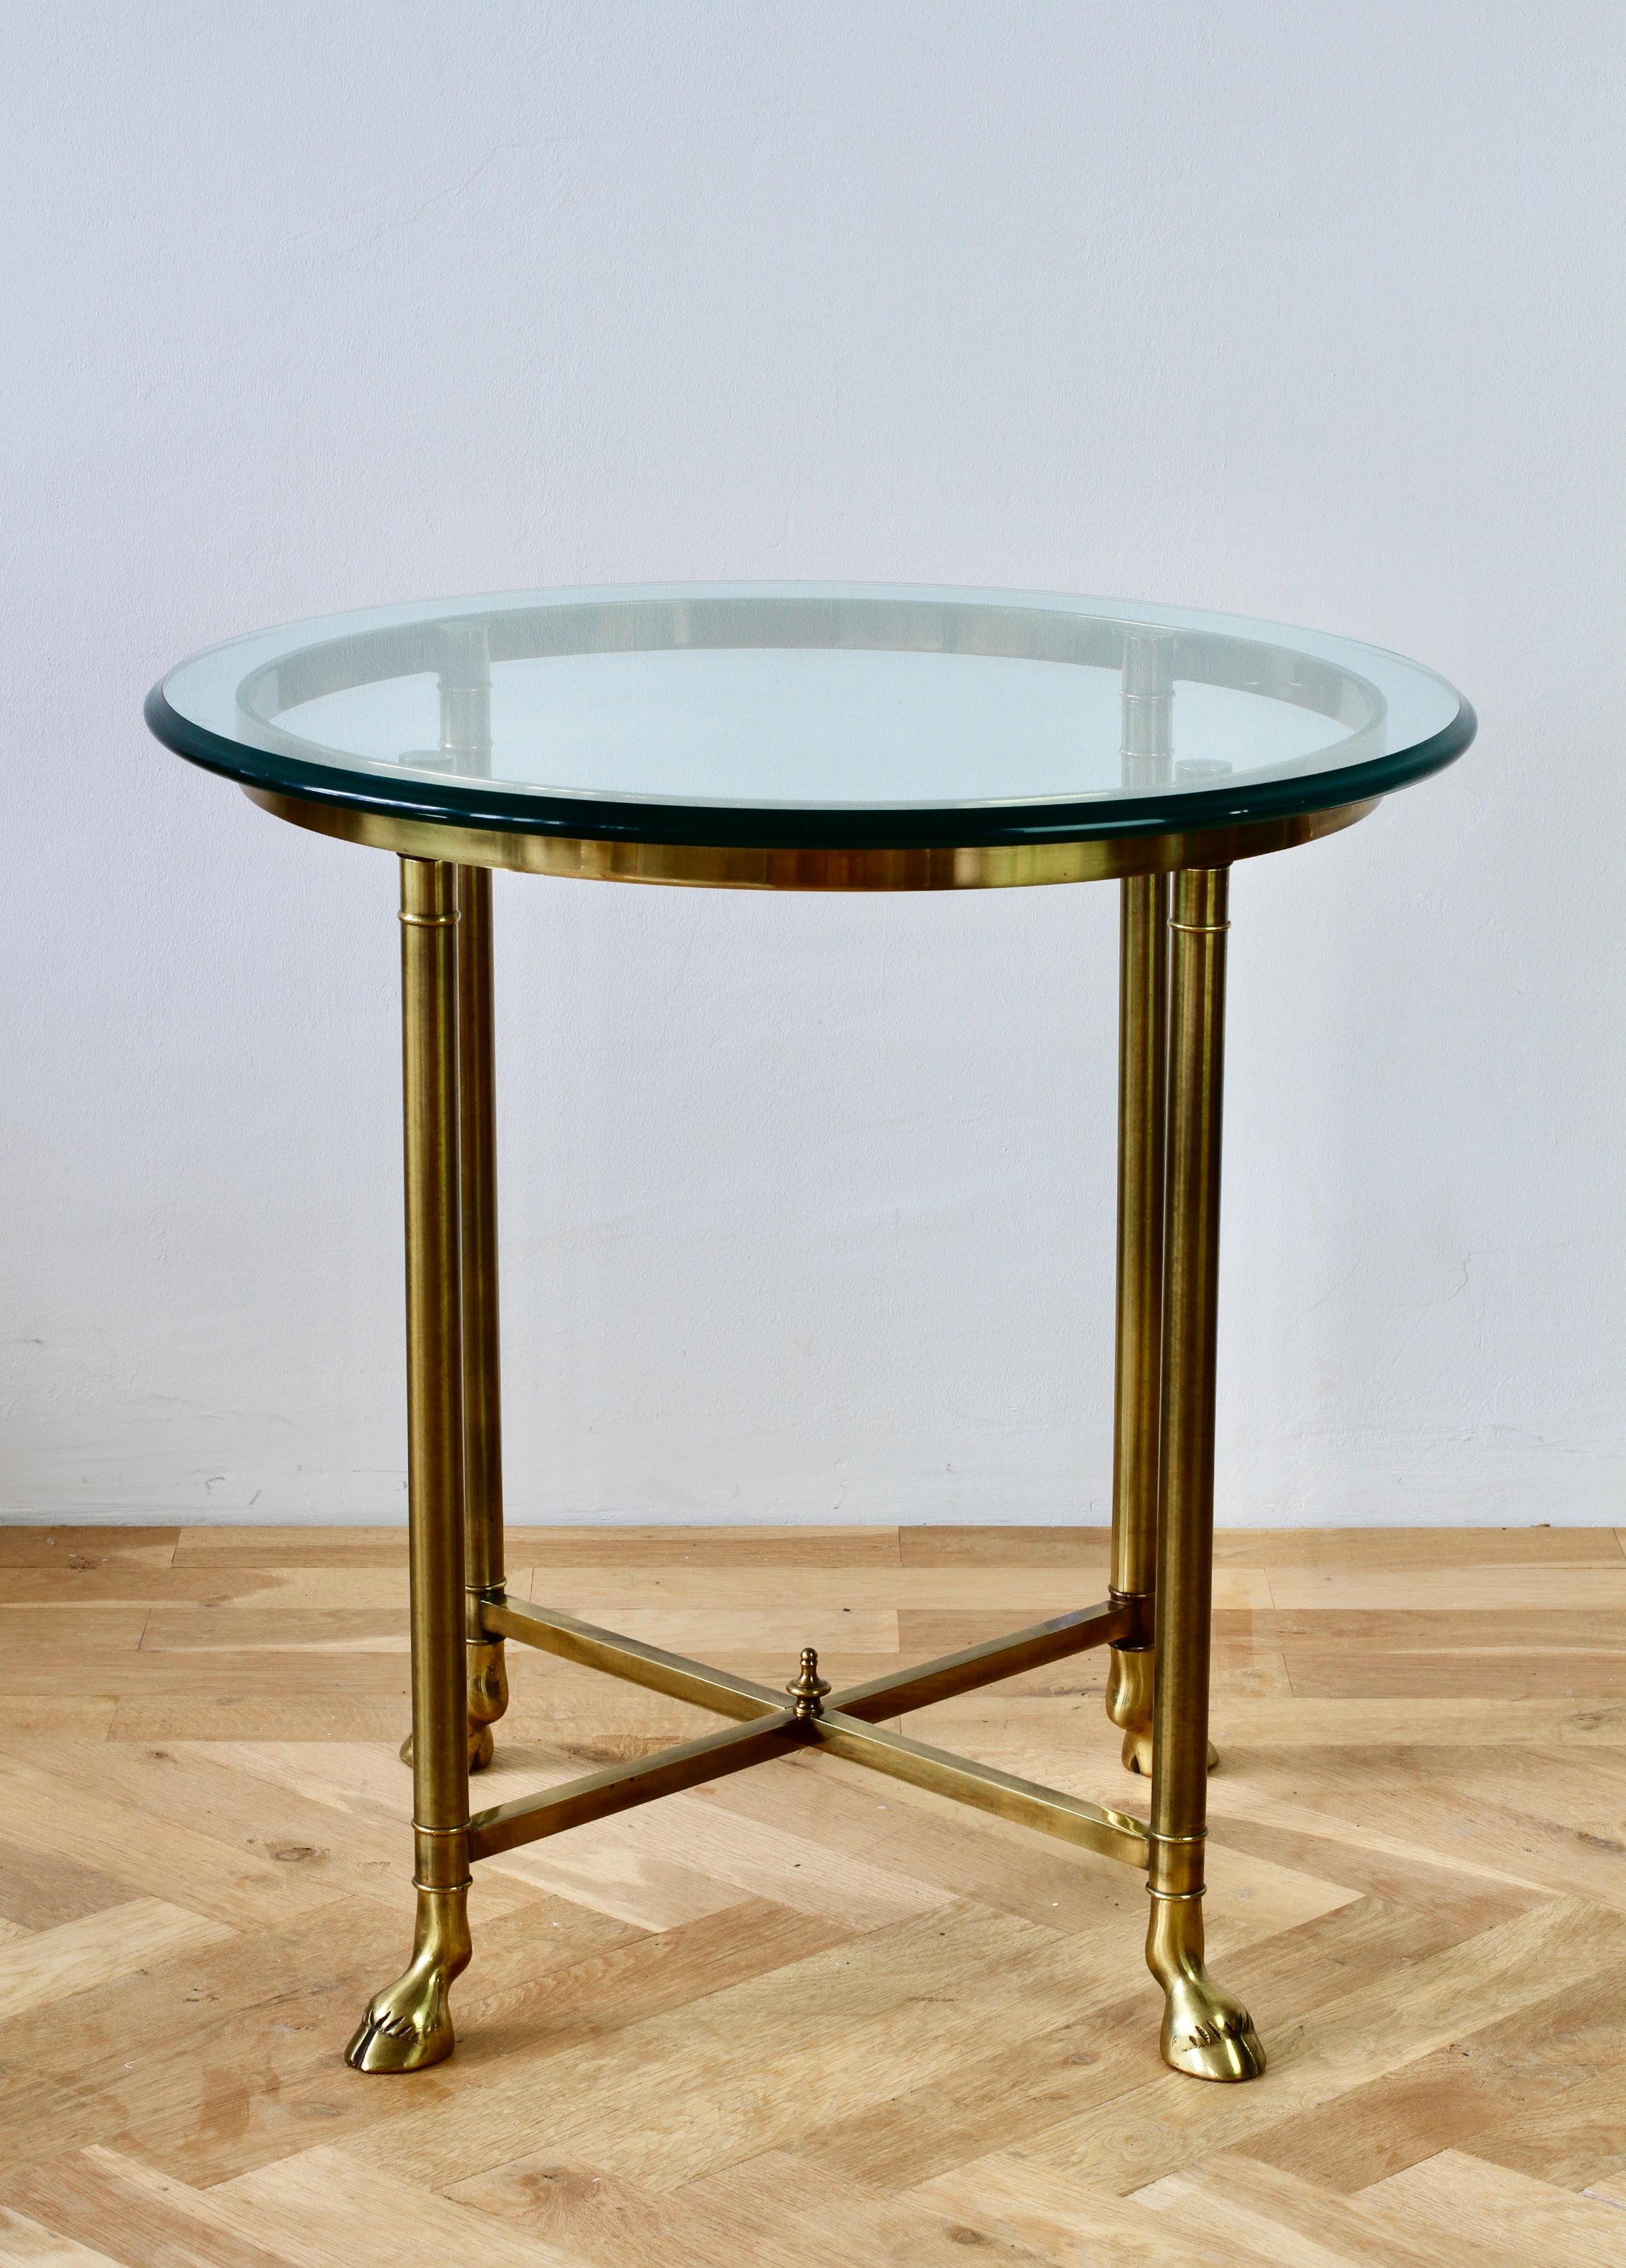 North American Maison Charles Style Cast Brass and Glass Side or End Table by La Barge, c. 1970